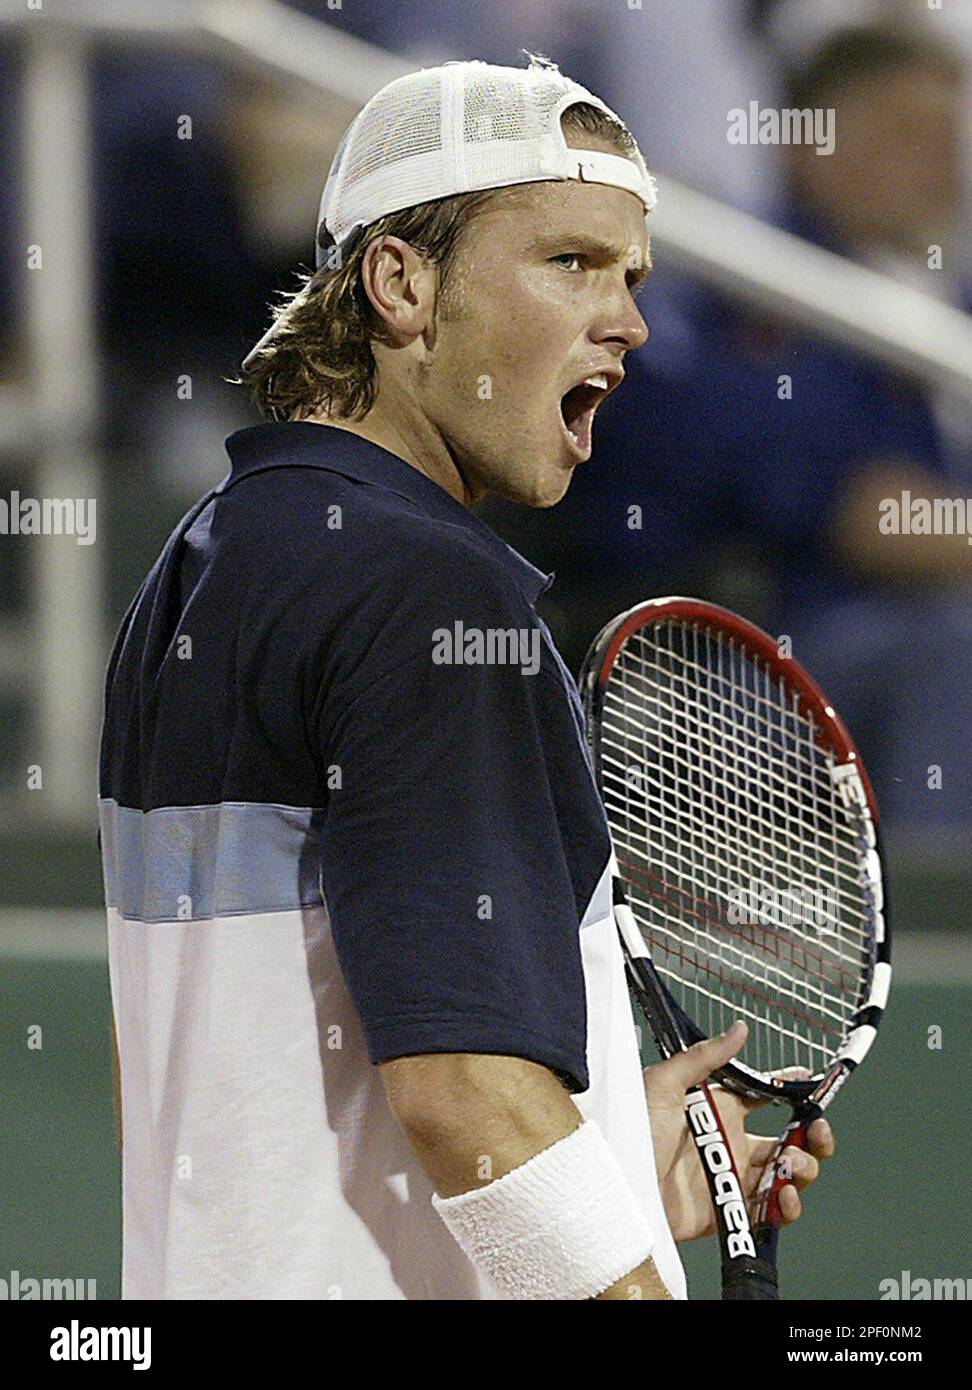 Robert Kendrick reacts after losing a point to Andy Roddick during the U.S.  Men's Clay Court Championships at Westside Tennis Club in Houston,  Wednesday, April 14, 2004. Roddick won 6-2, 6-3. (AP